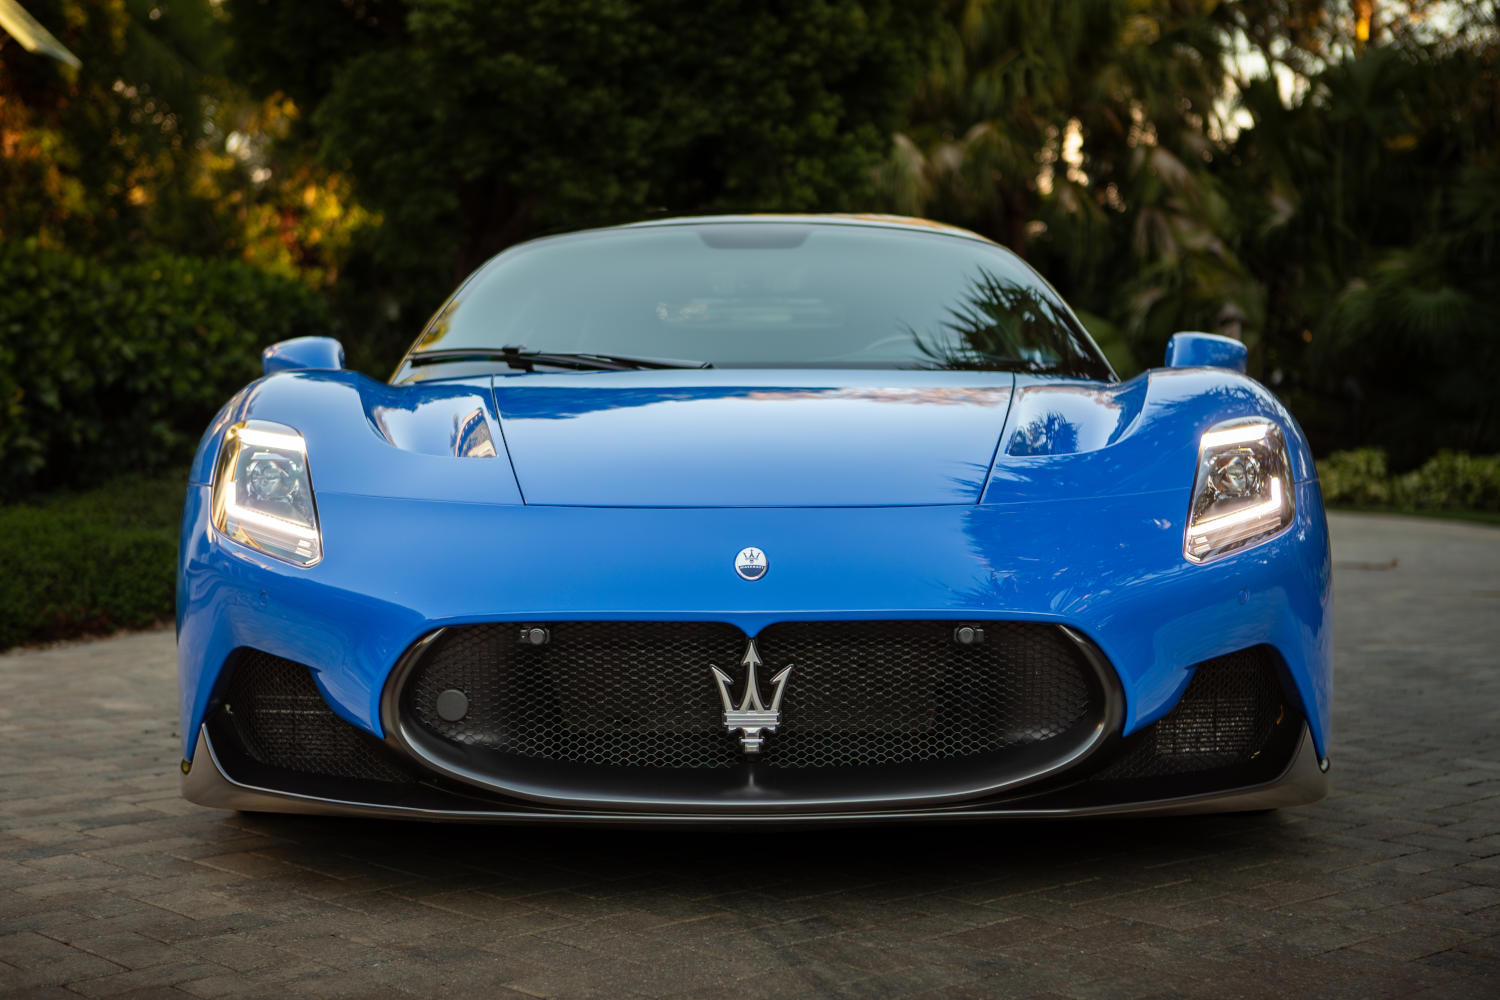 The front end of the luxury sports car